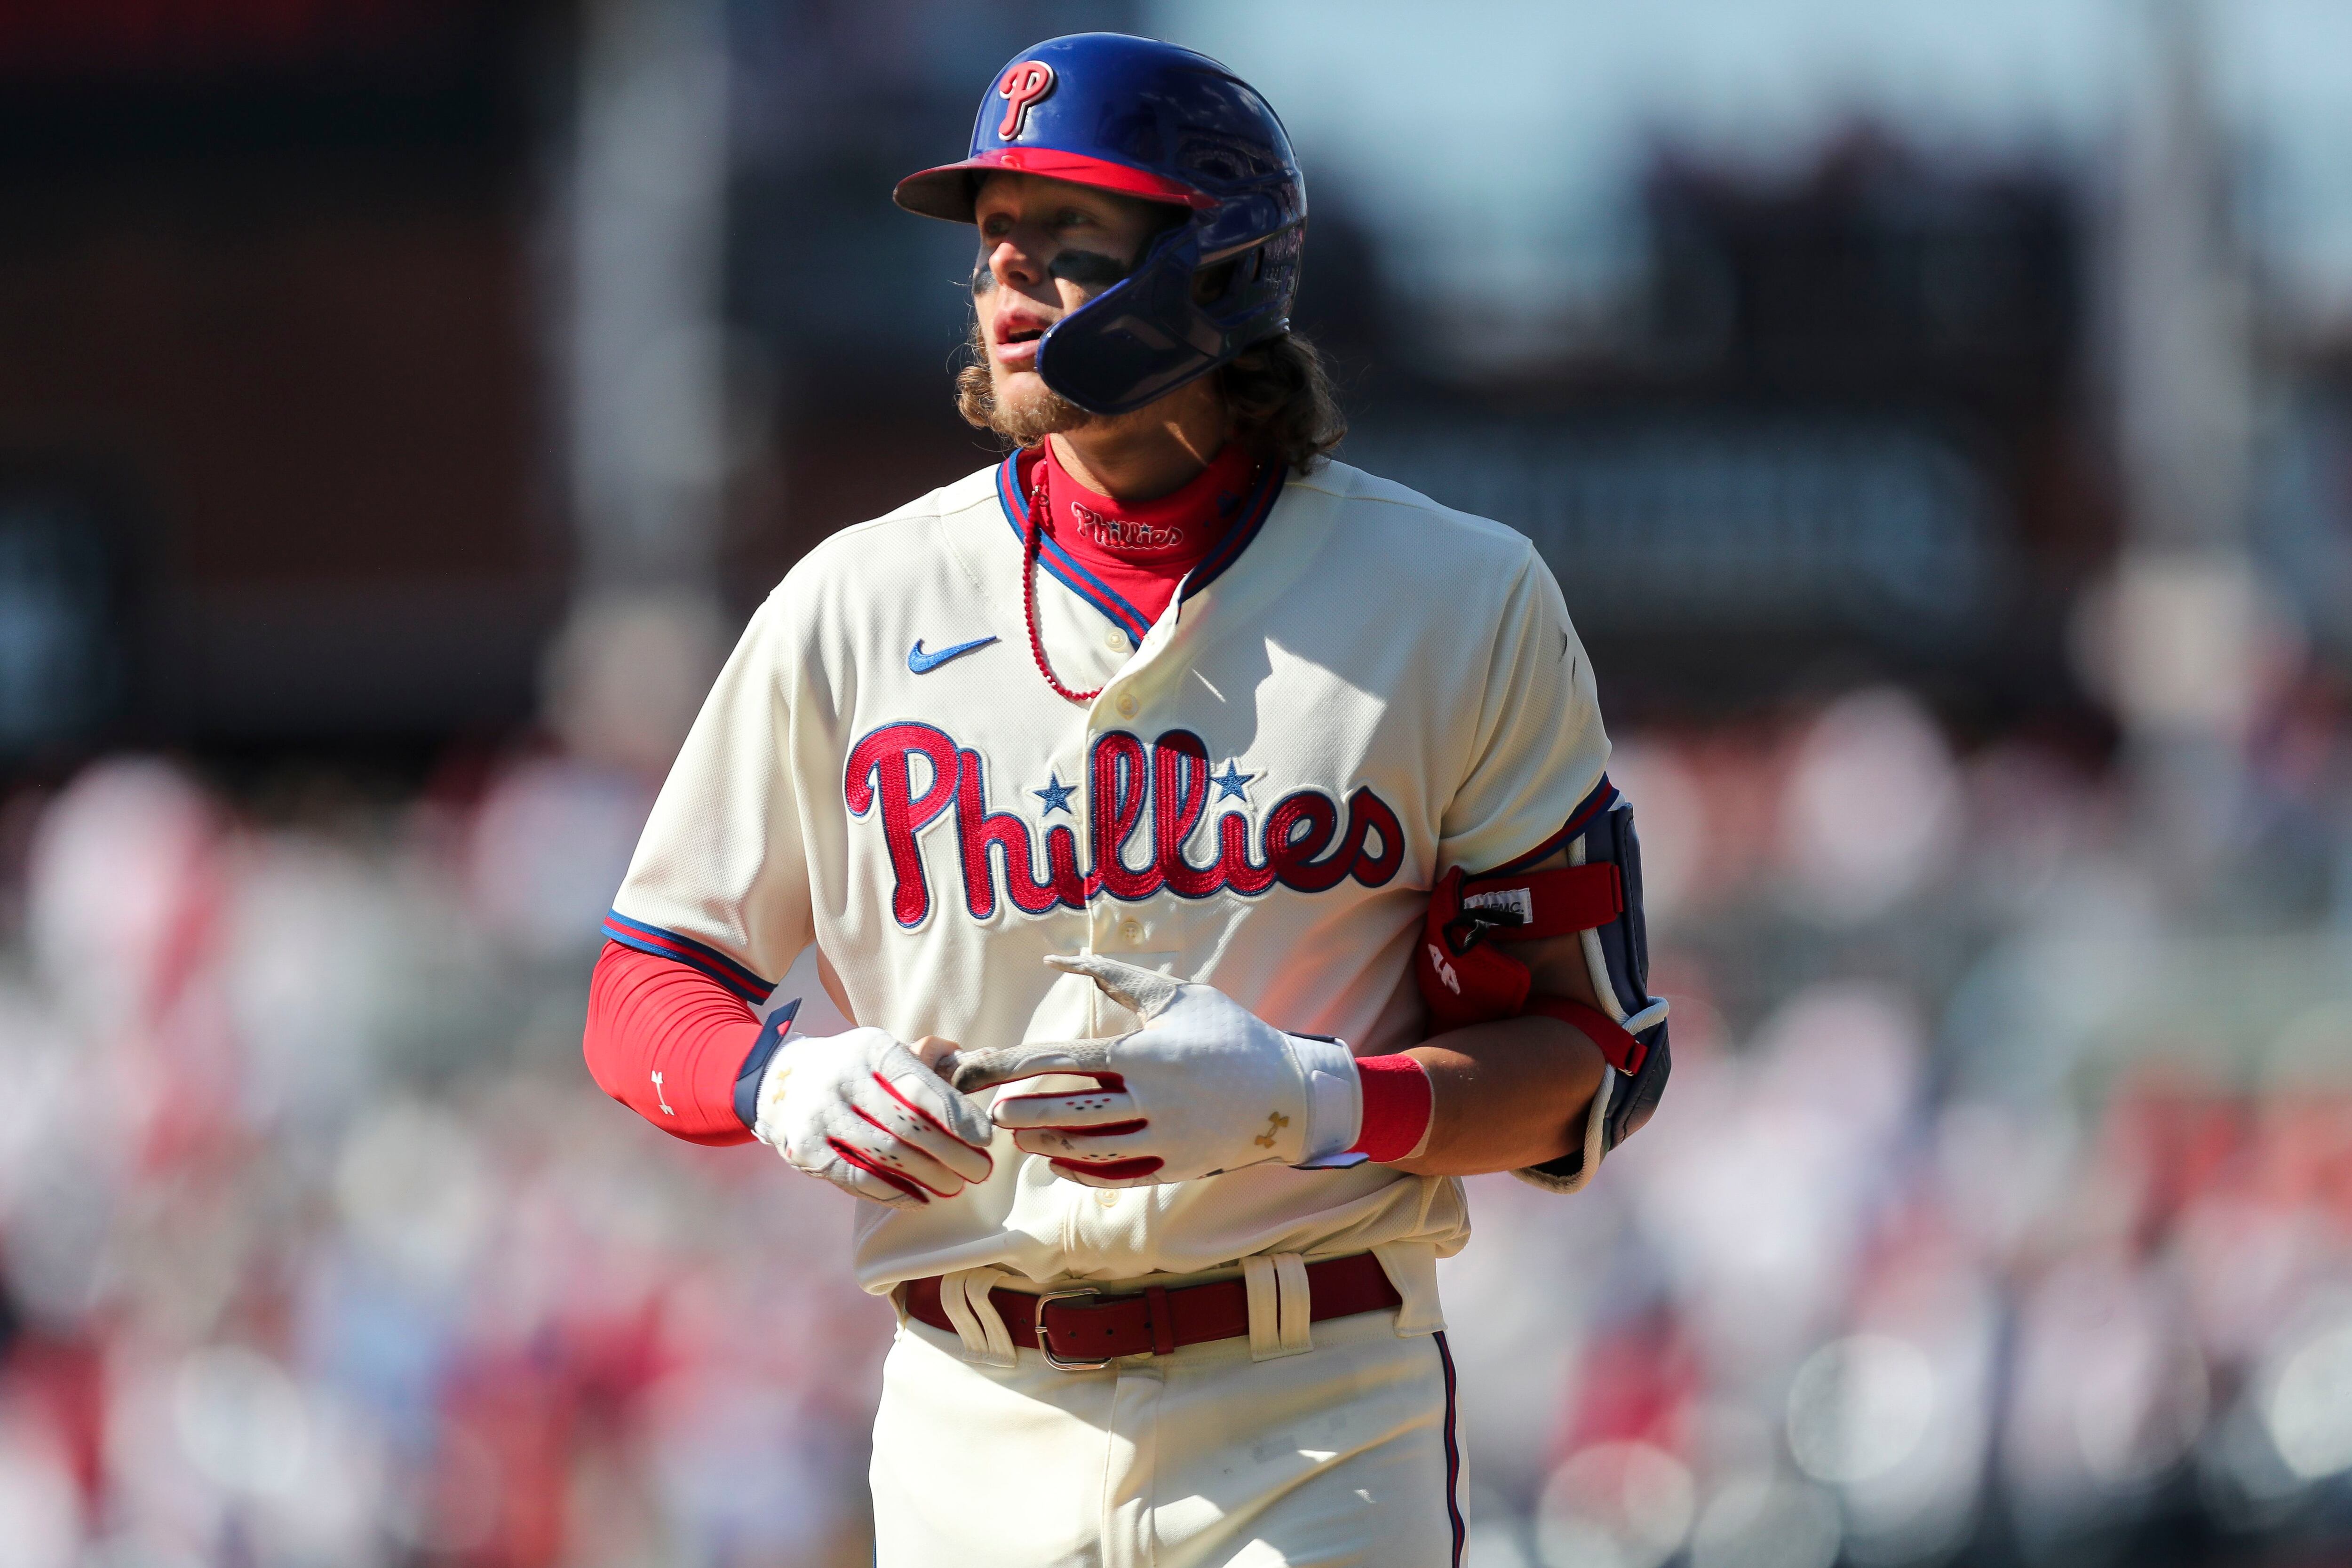 Phillies: With Hall injury, Sosa needs to be a part of the lineup